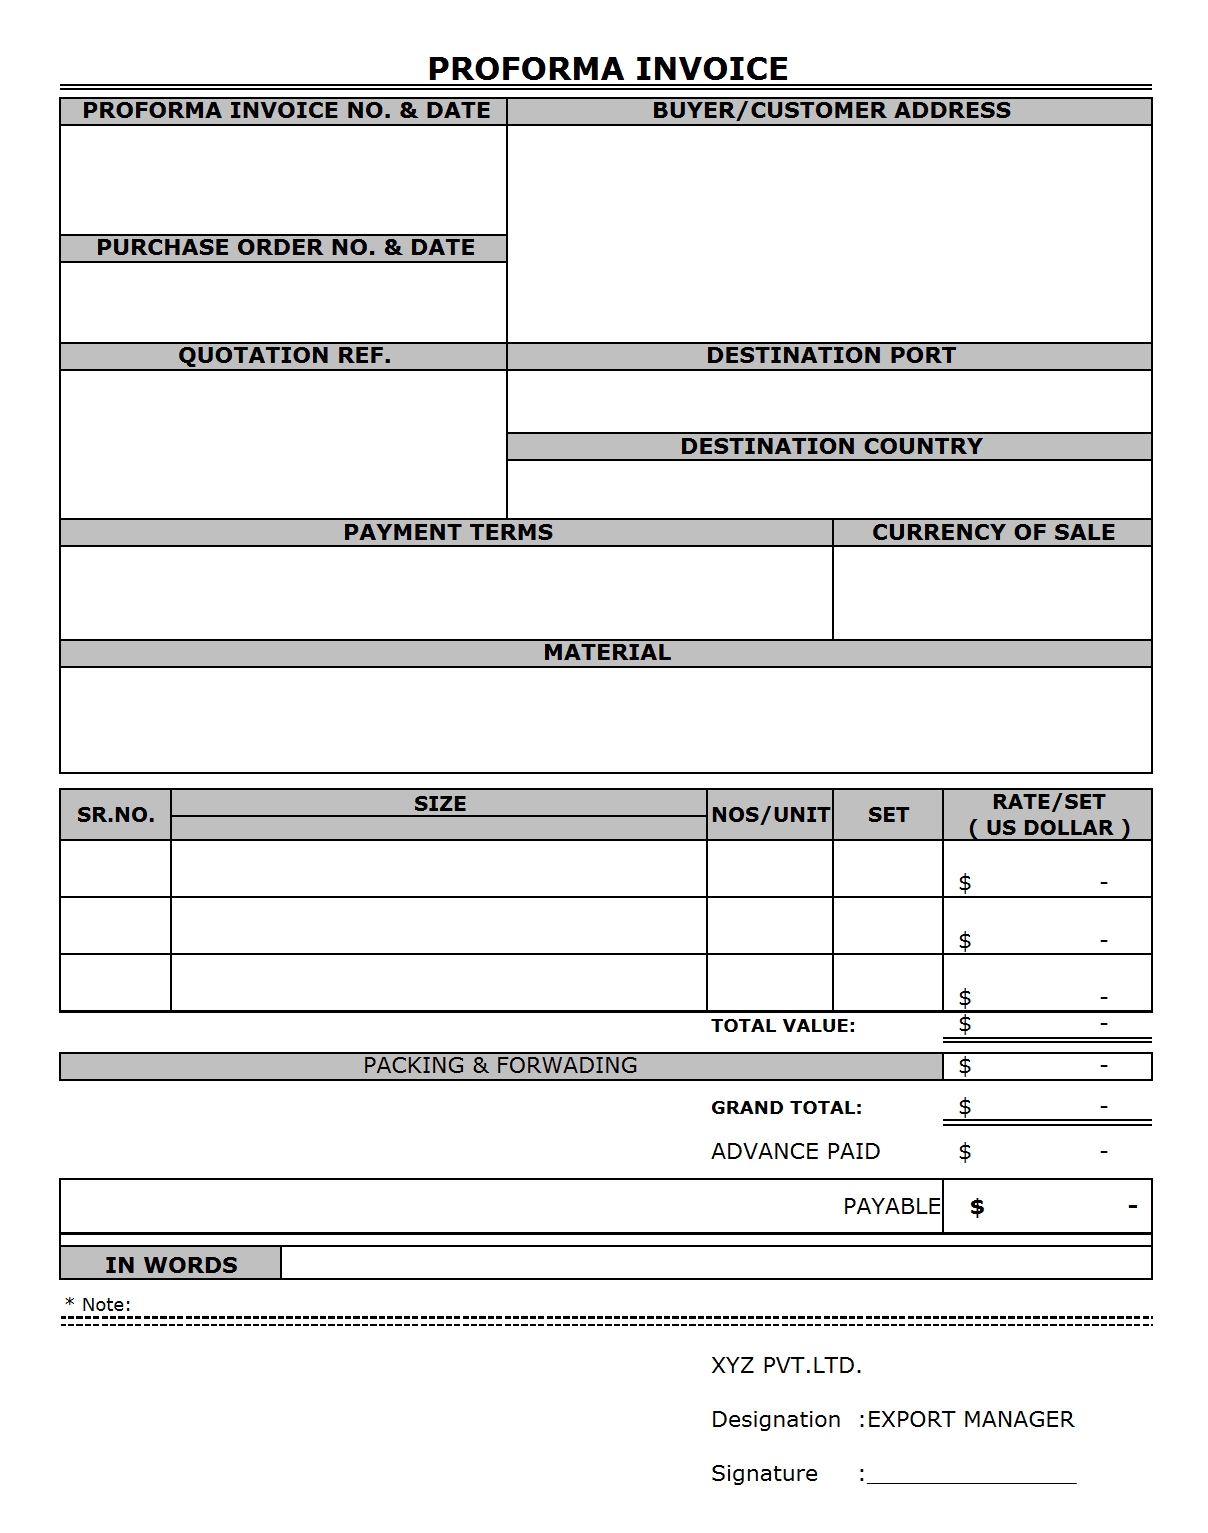 invoice in word invoice template word contractor invoice proforma invoice in word format